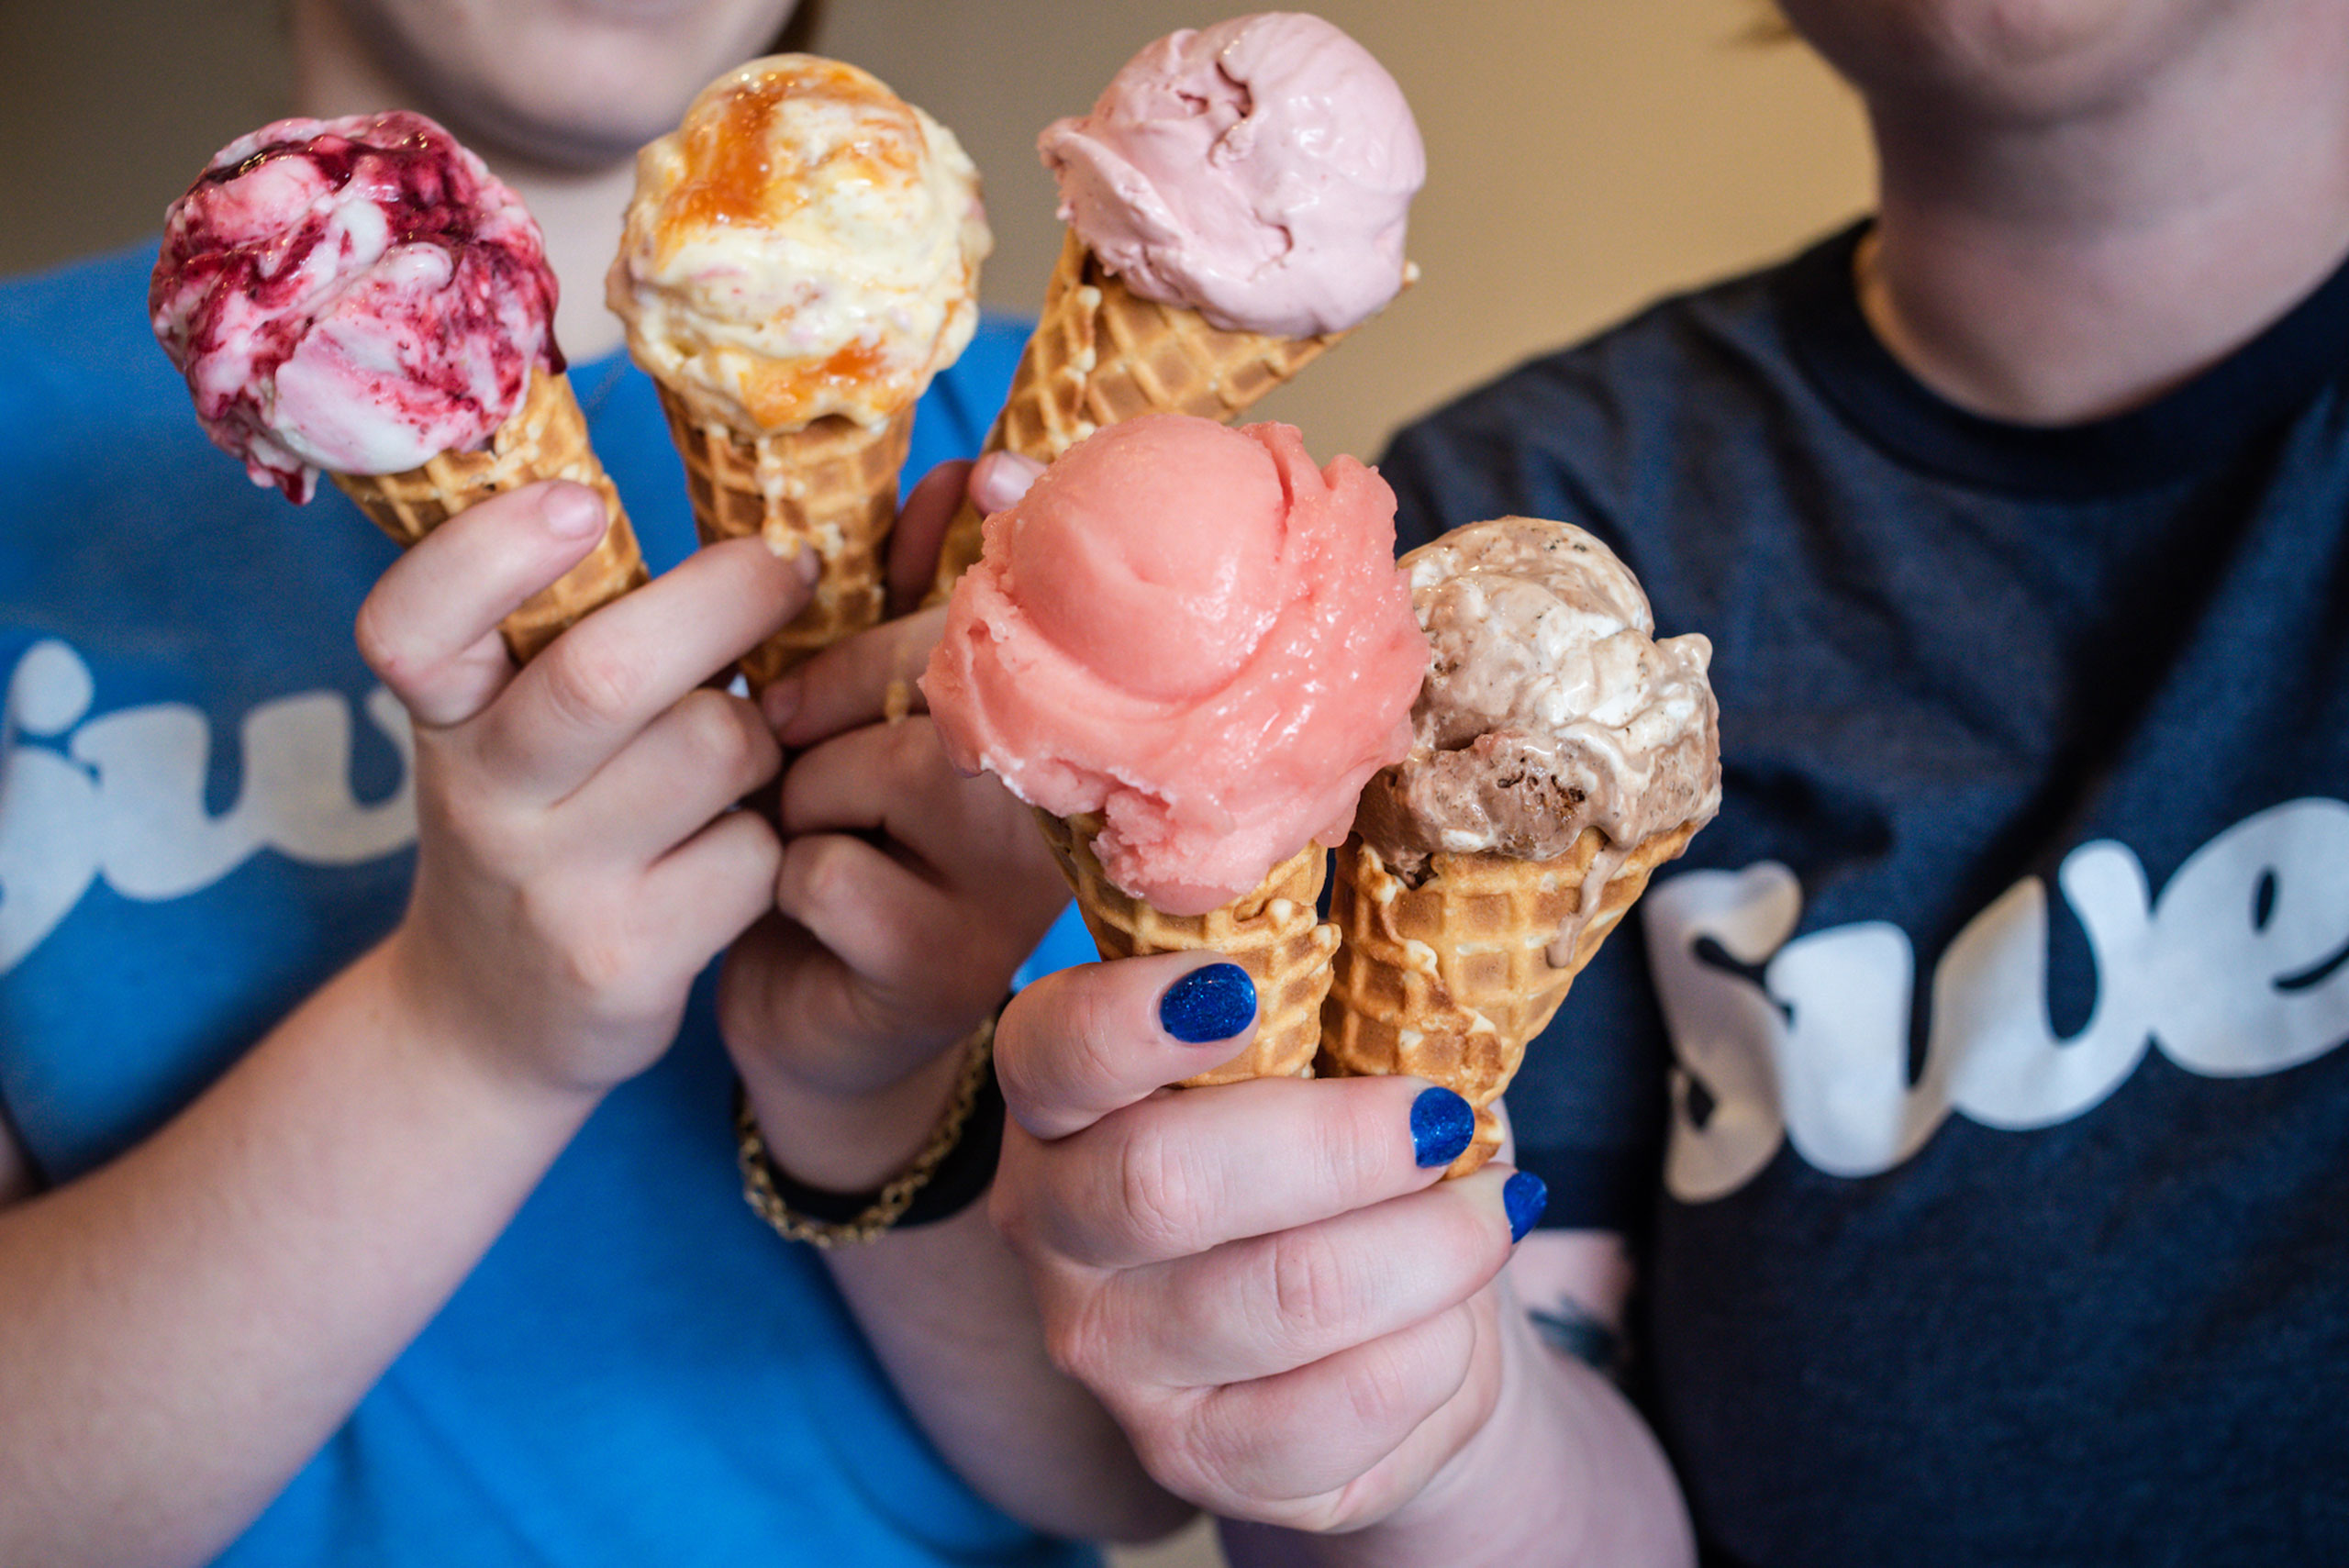 Close-up of two employees holding 6 ice cream cones filled with a variety of colorful flavors